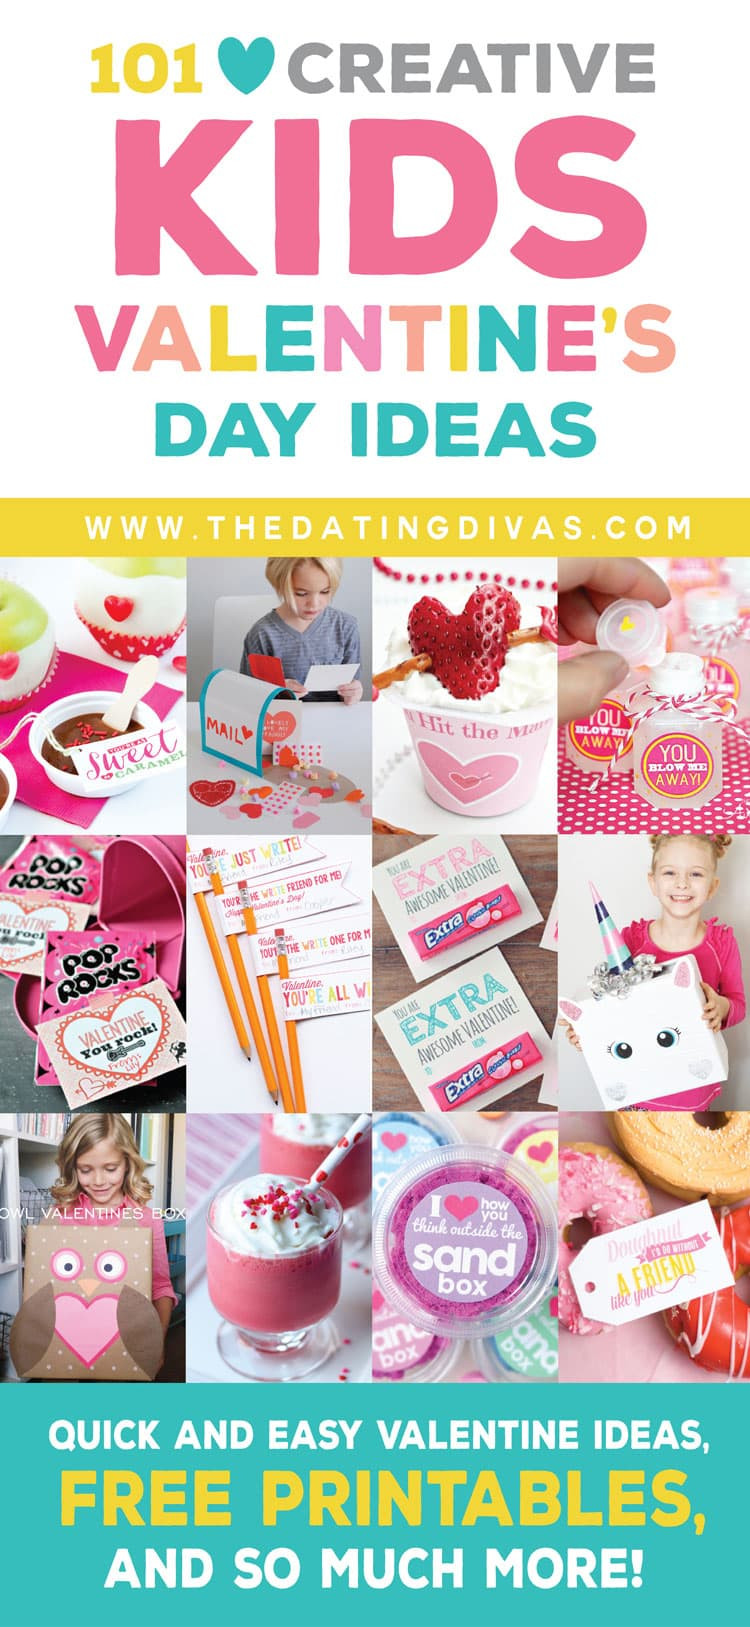 Creative Valentines Day Gift Ideas
 100 Kids Valentine s Day Ideas Treats Gifts & More